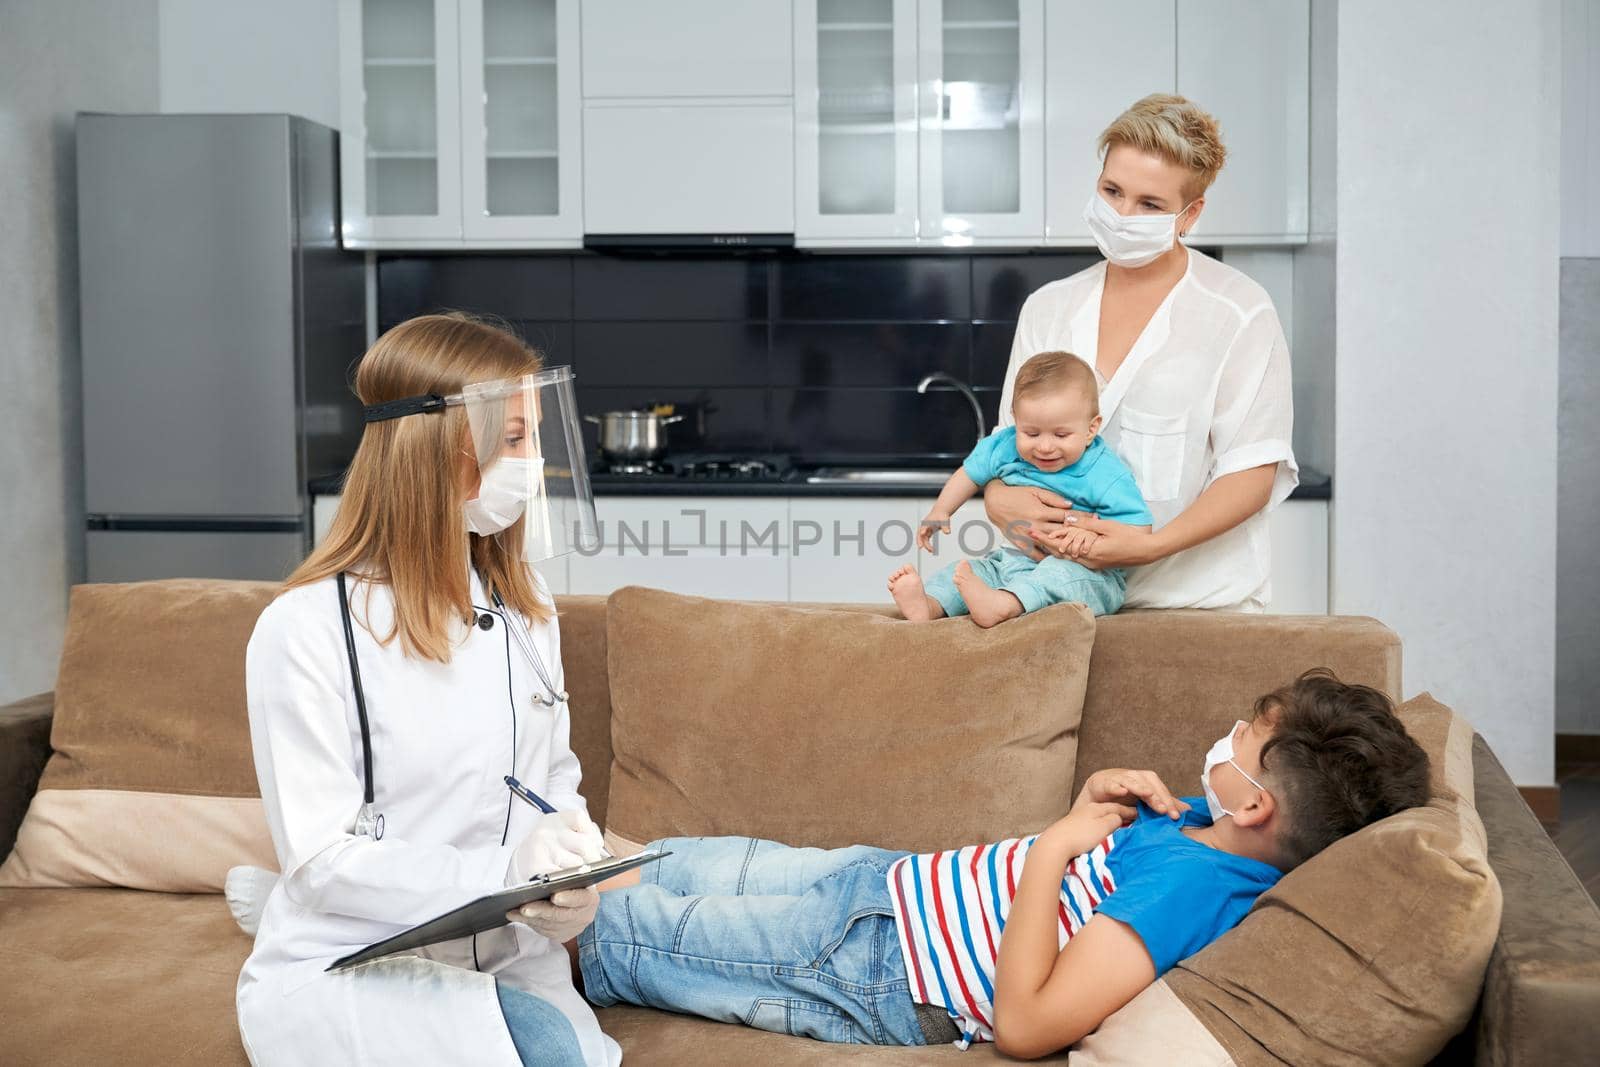 Female doctor in medical uniform examining sick teenager at home that lying on couch. Mother standing near with youngest son on hands. Pandemic time and children treatment.